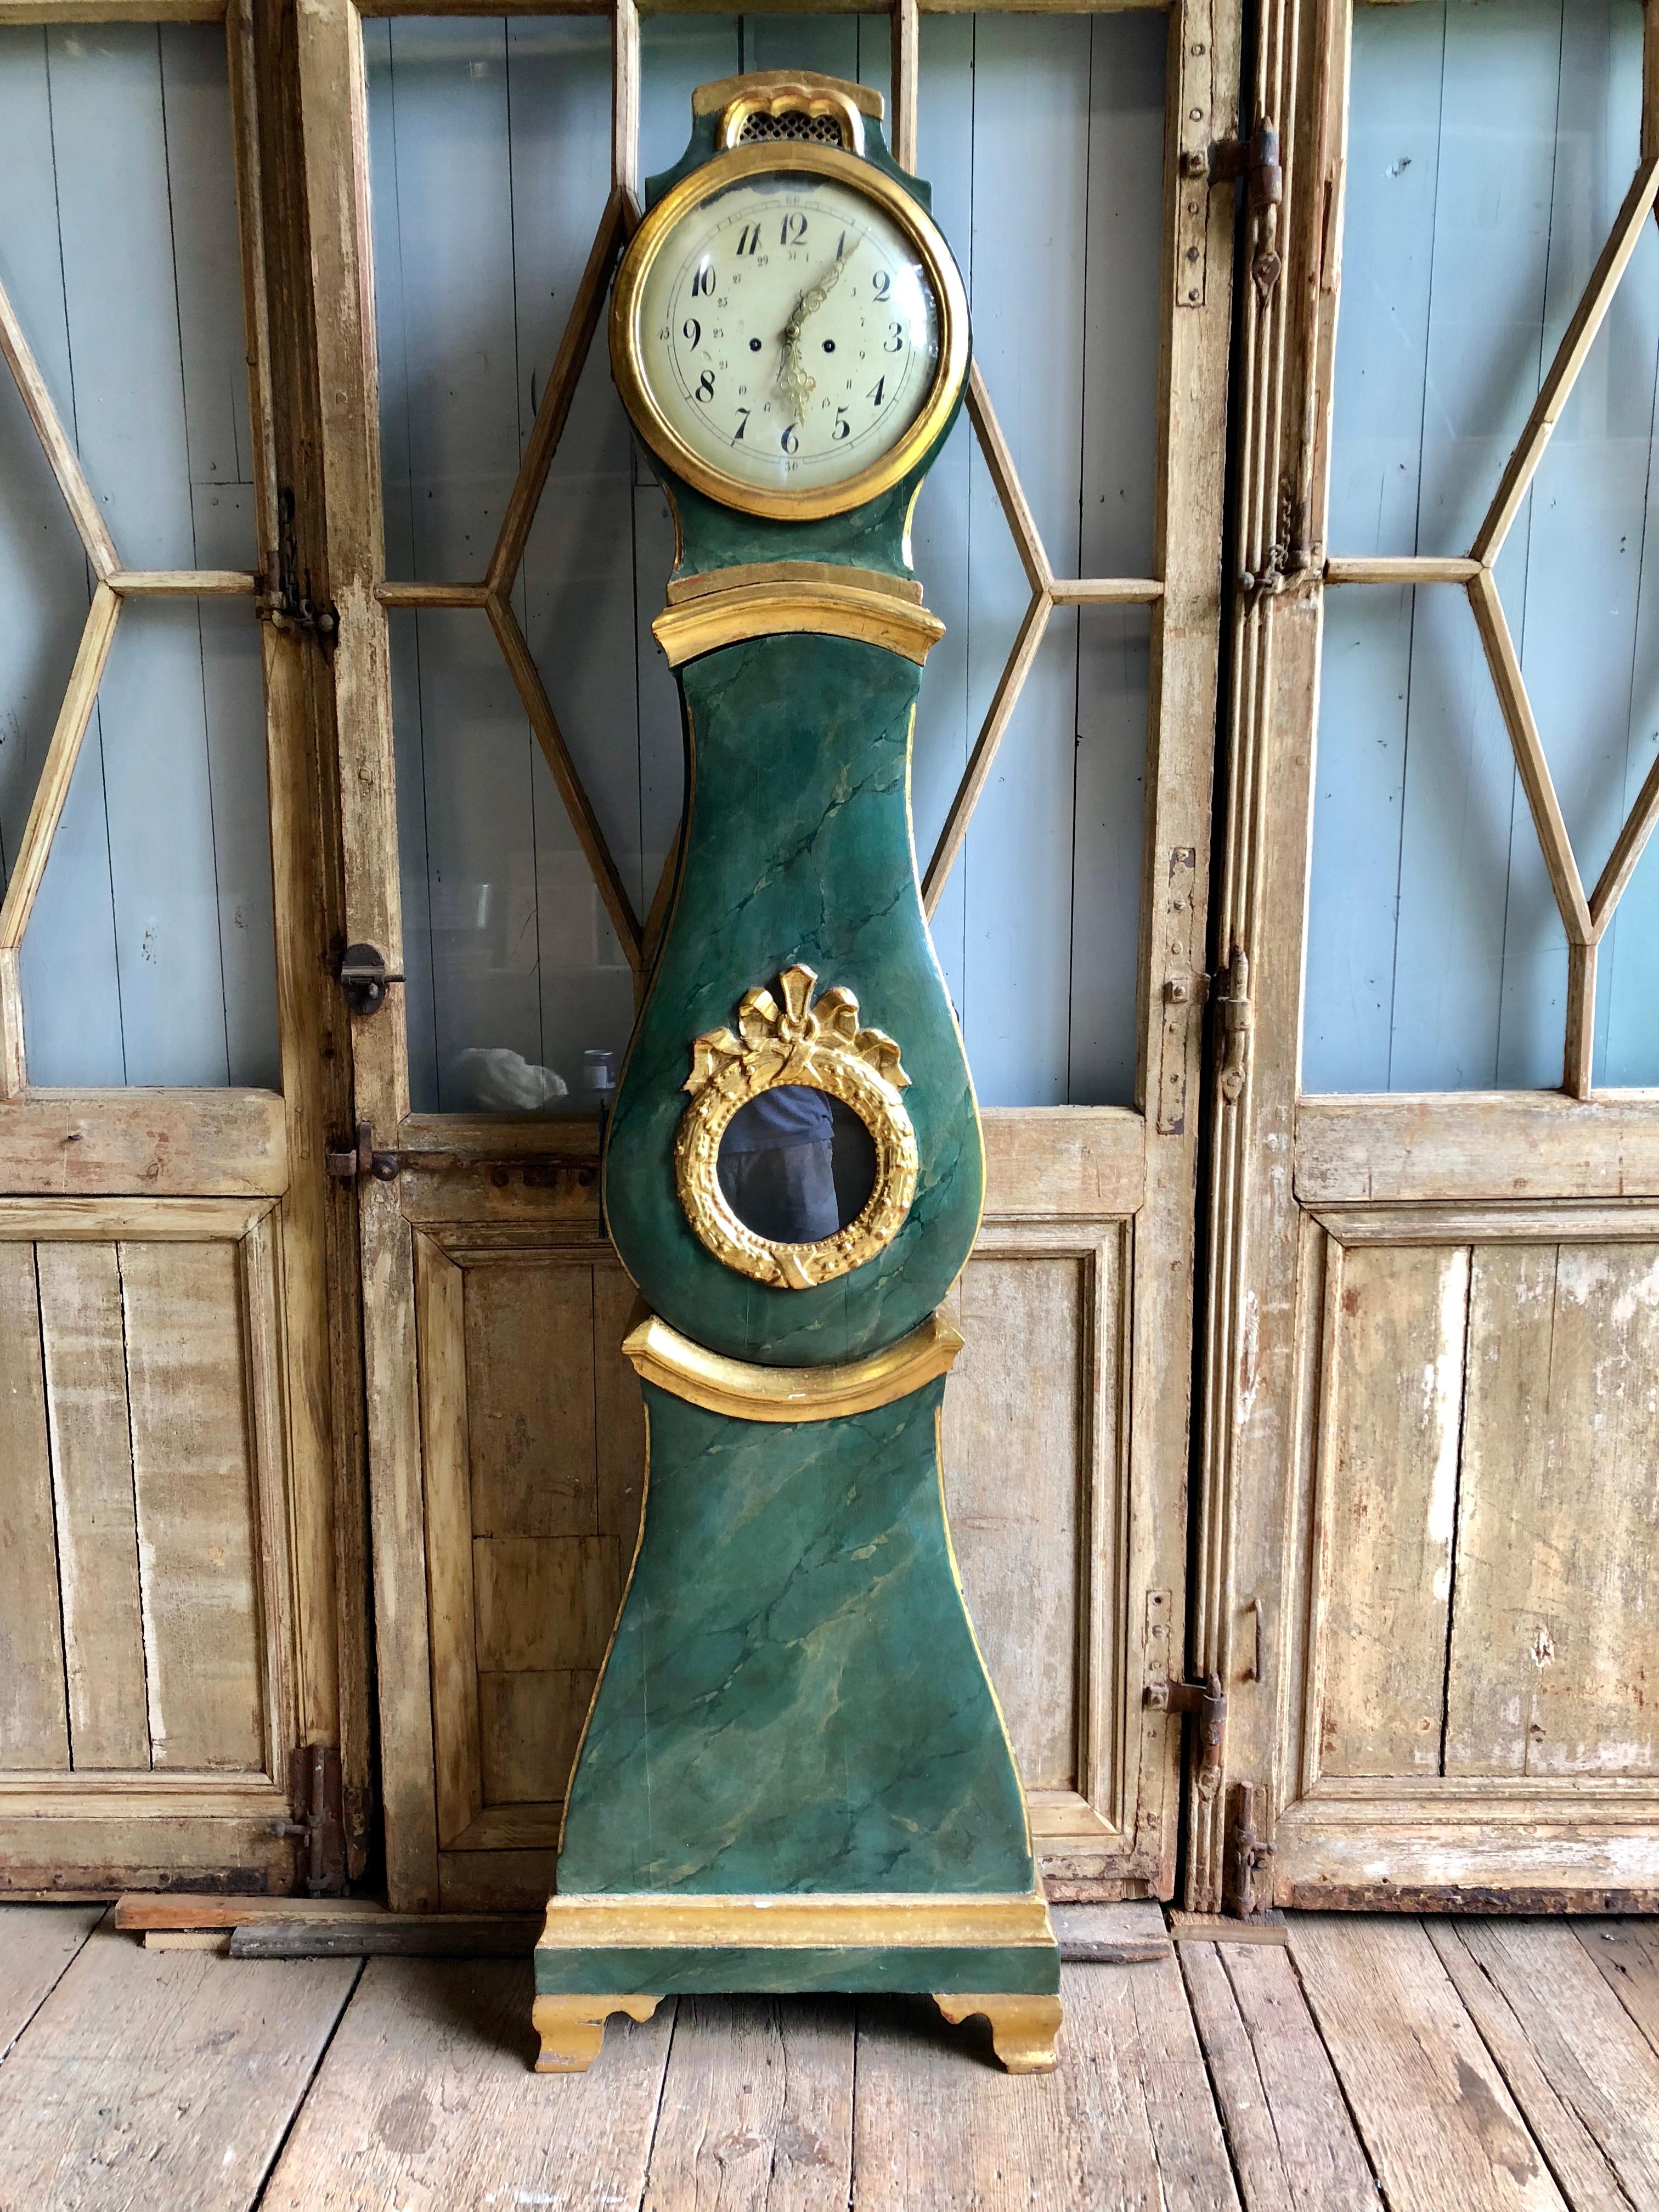 A fine 18th century Gustavian “Mora” tall-case clock from Sweden circa 1760, with painted dial and faux marble painted case with parcel gilt decoration.